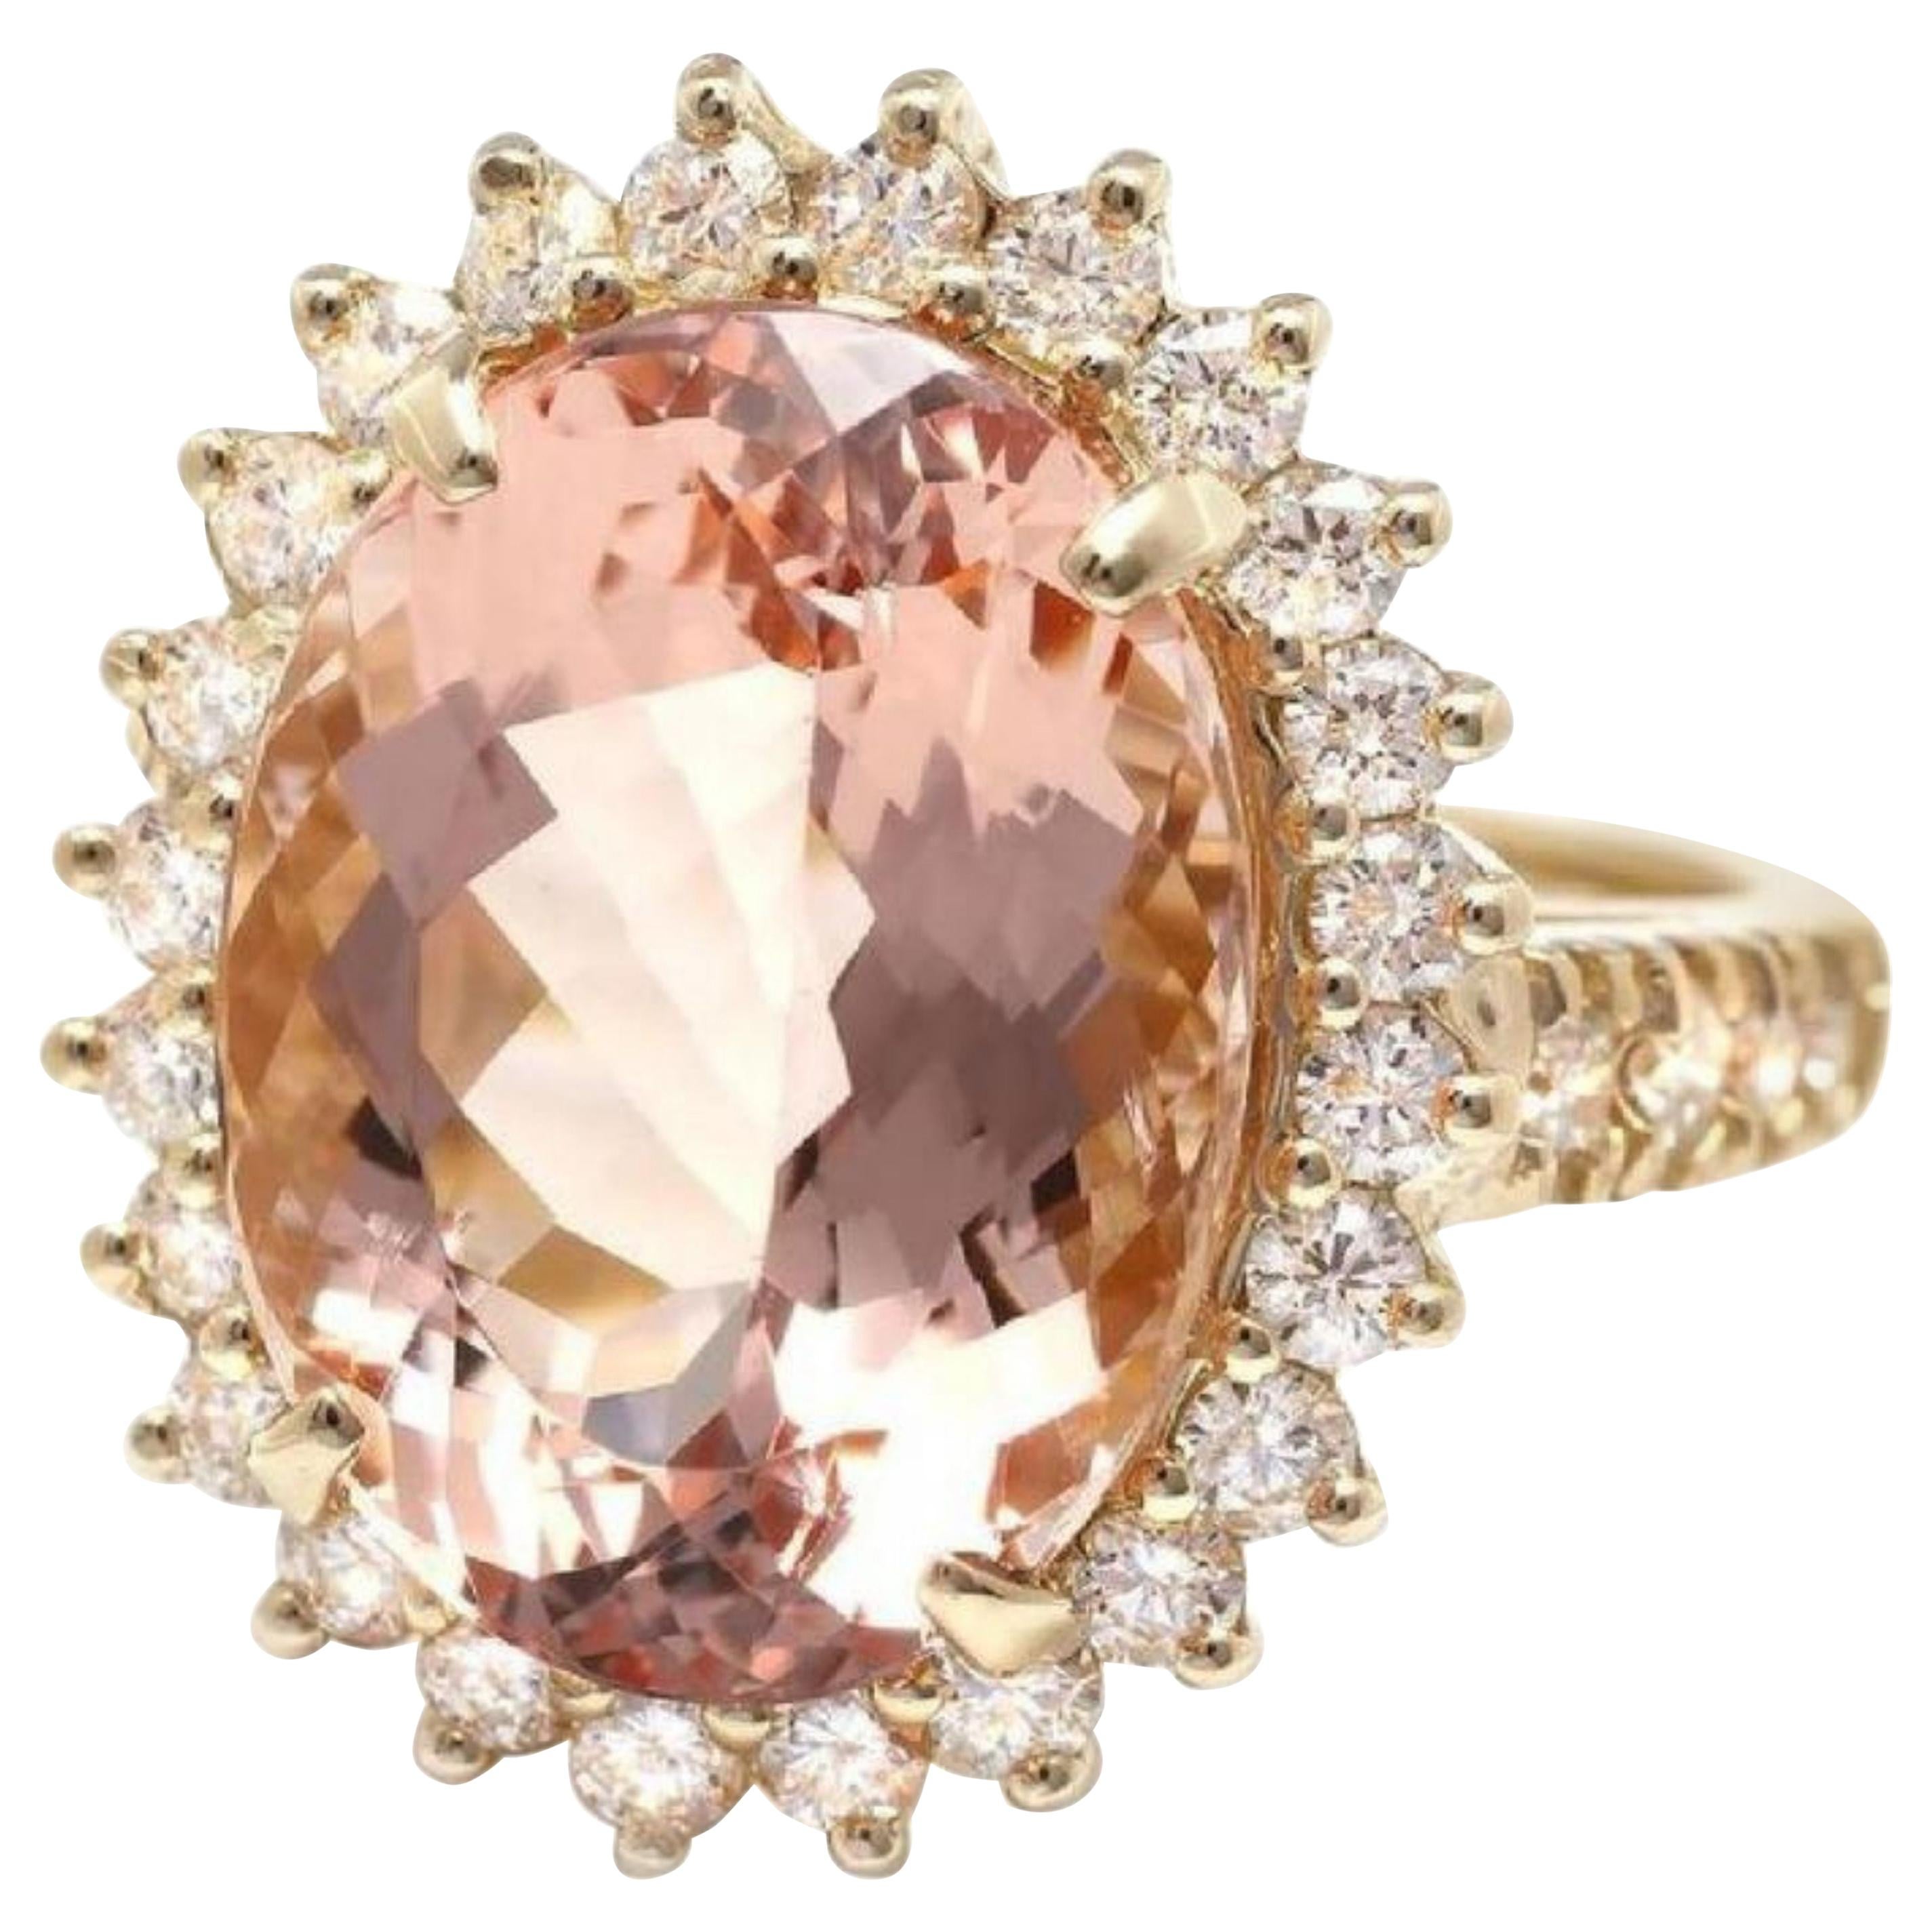 10.00 Carat Exquisite Natural Morganite and Diamond 14K Solid Yellow Gold Ring